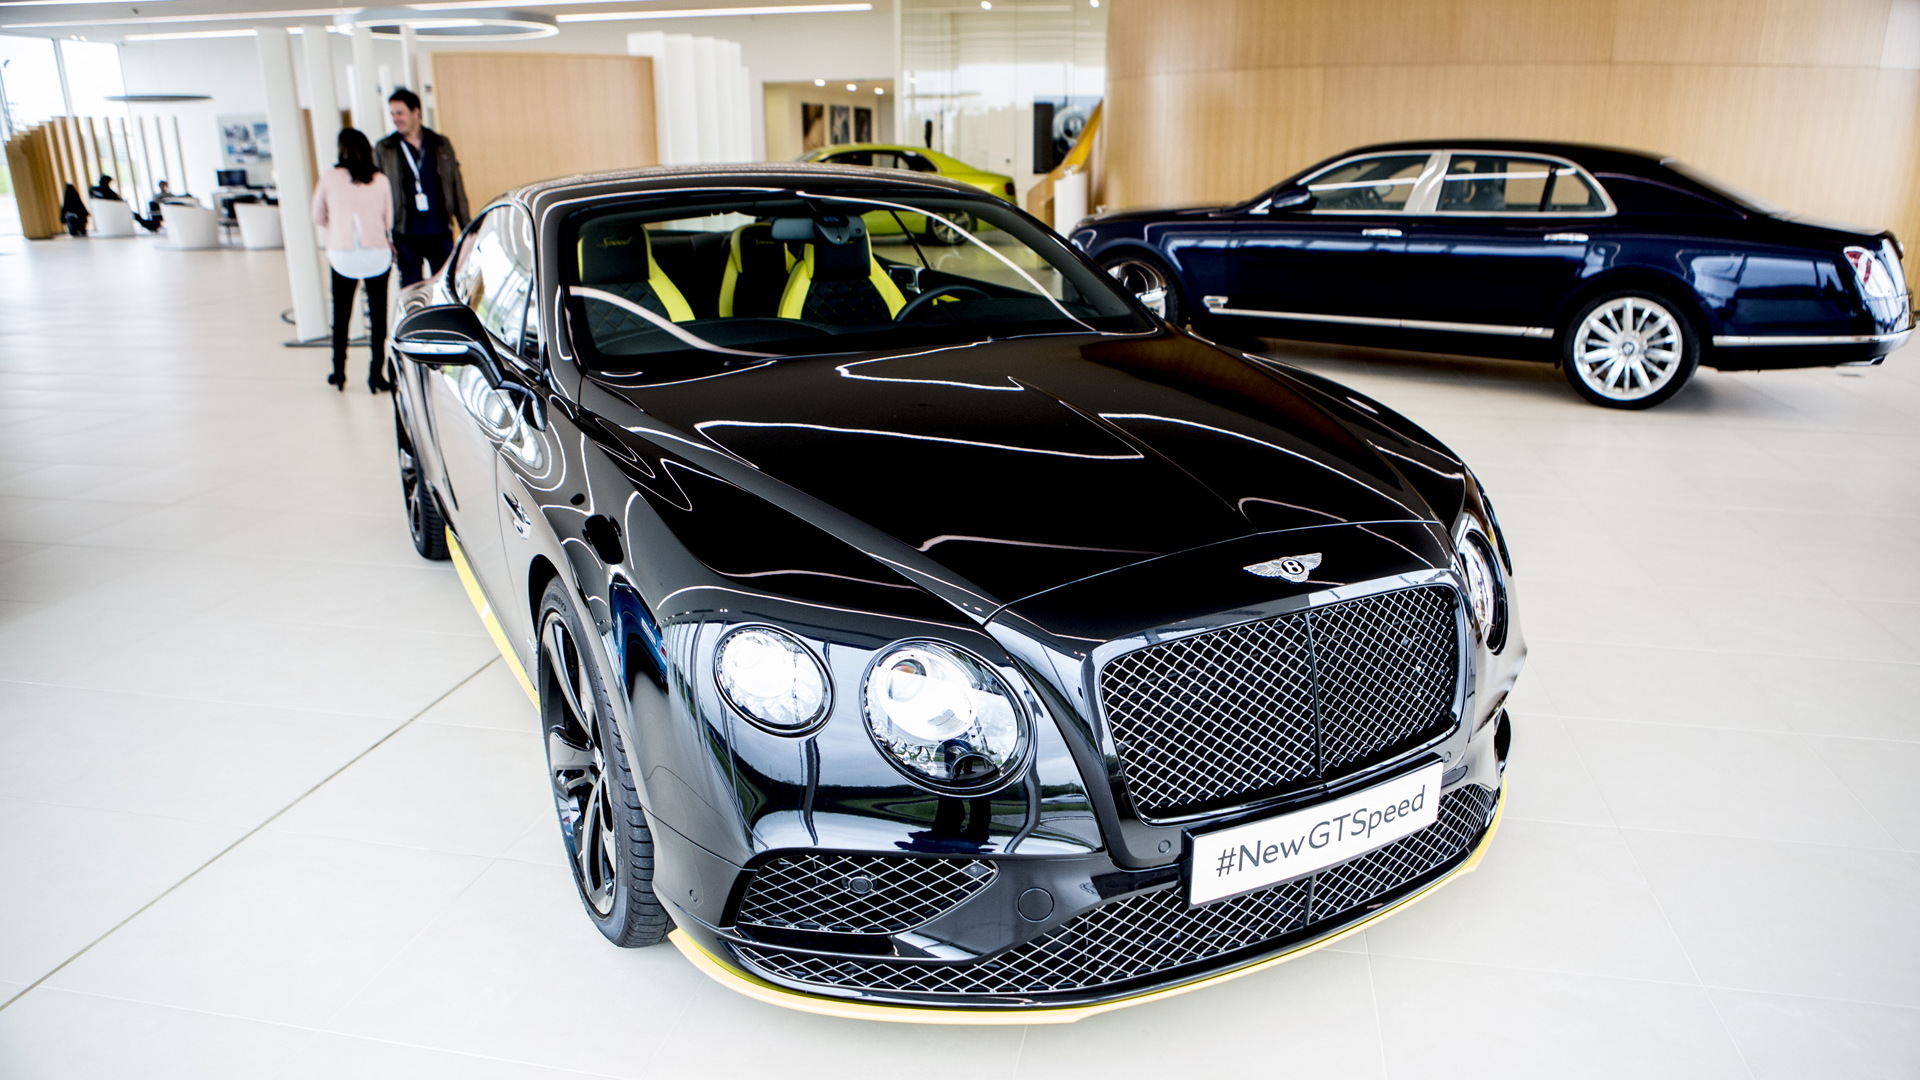 Behind the scenes at Bentley’s assembly plant in Crewe, England - Image via AutoEmotionenTV